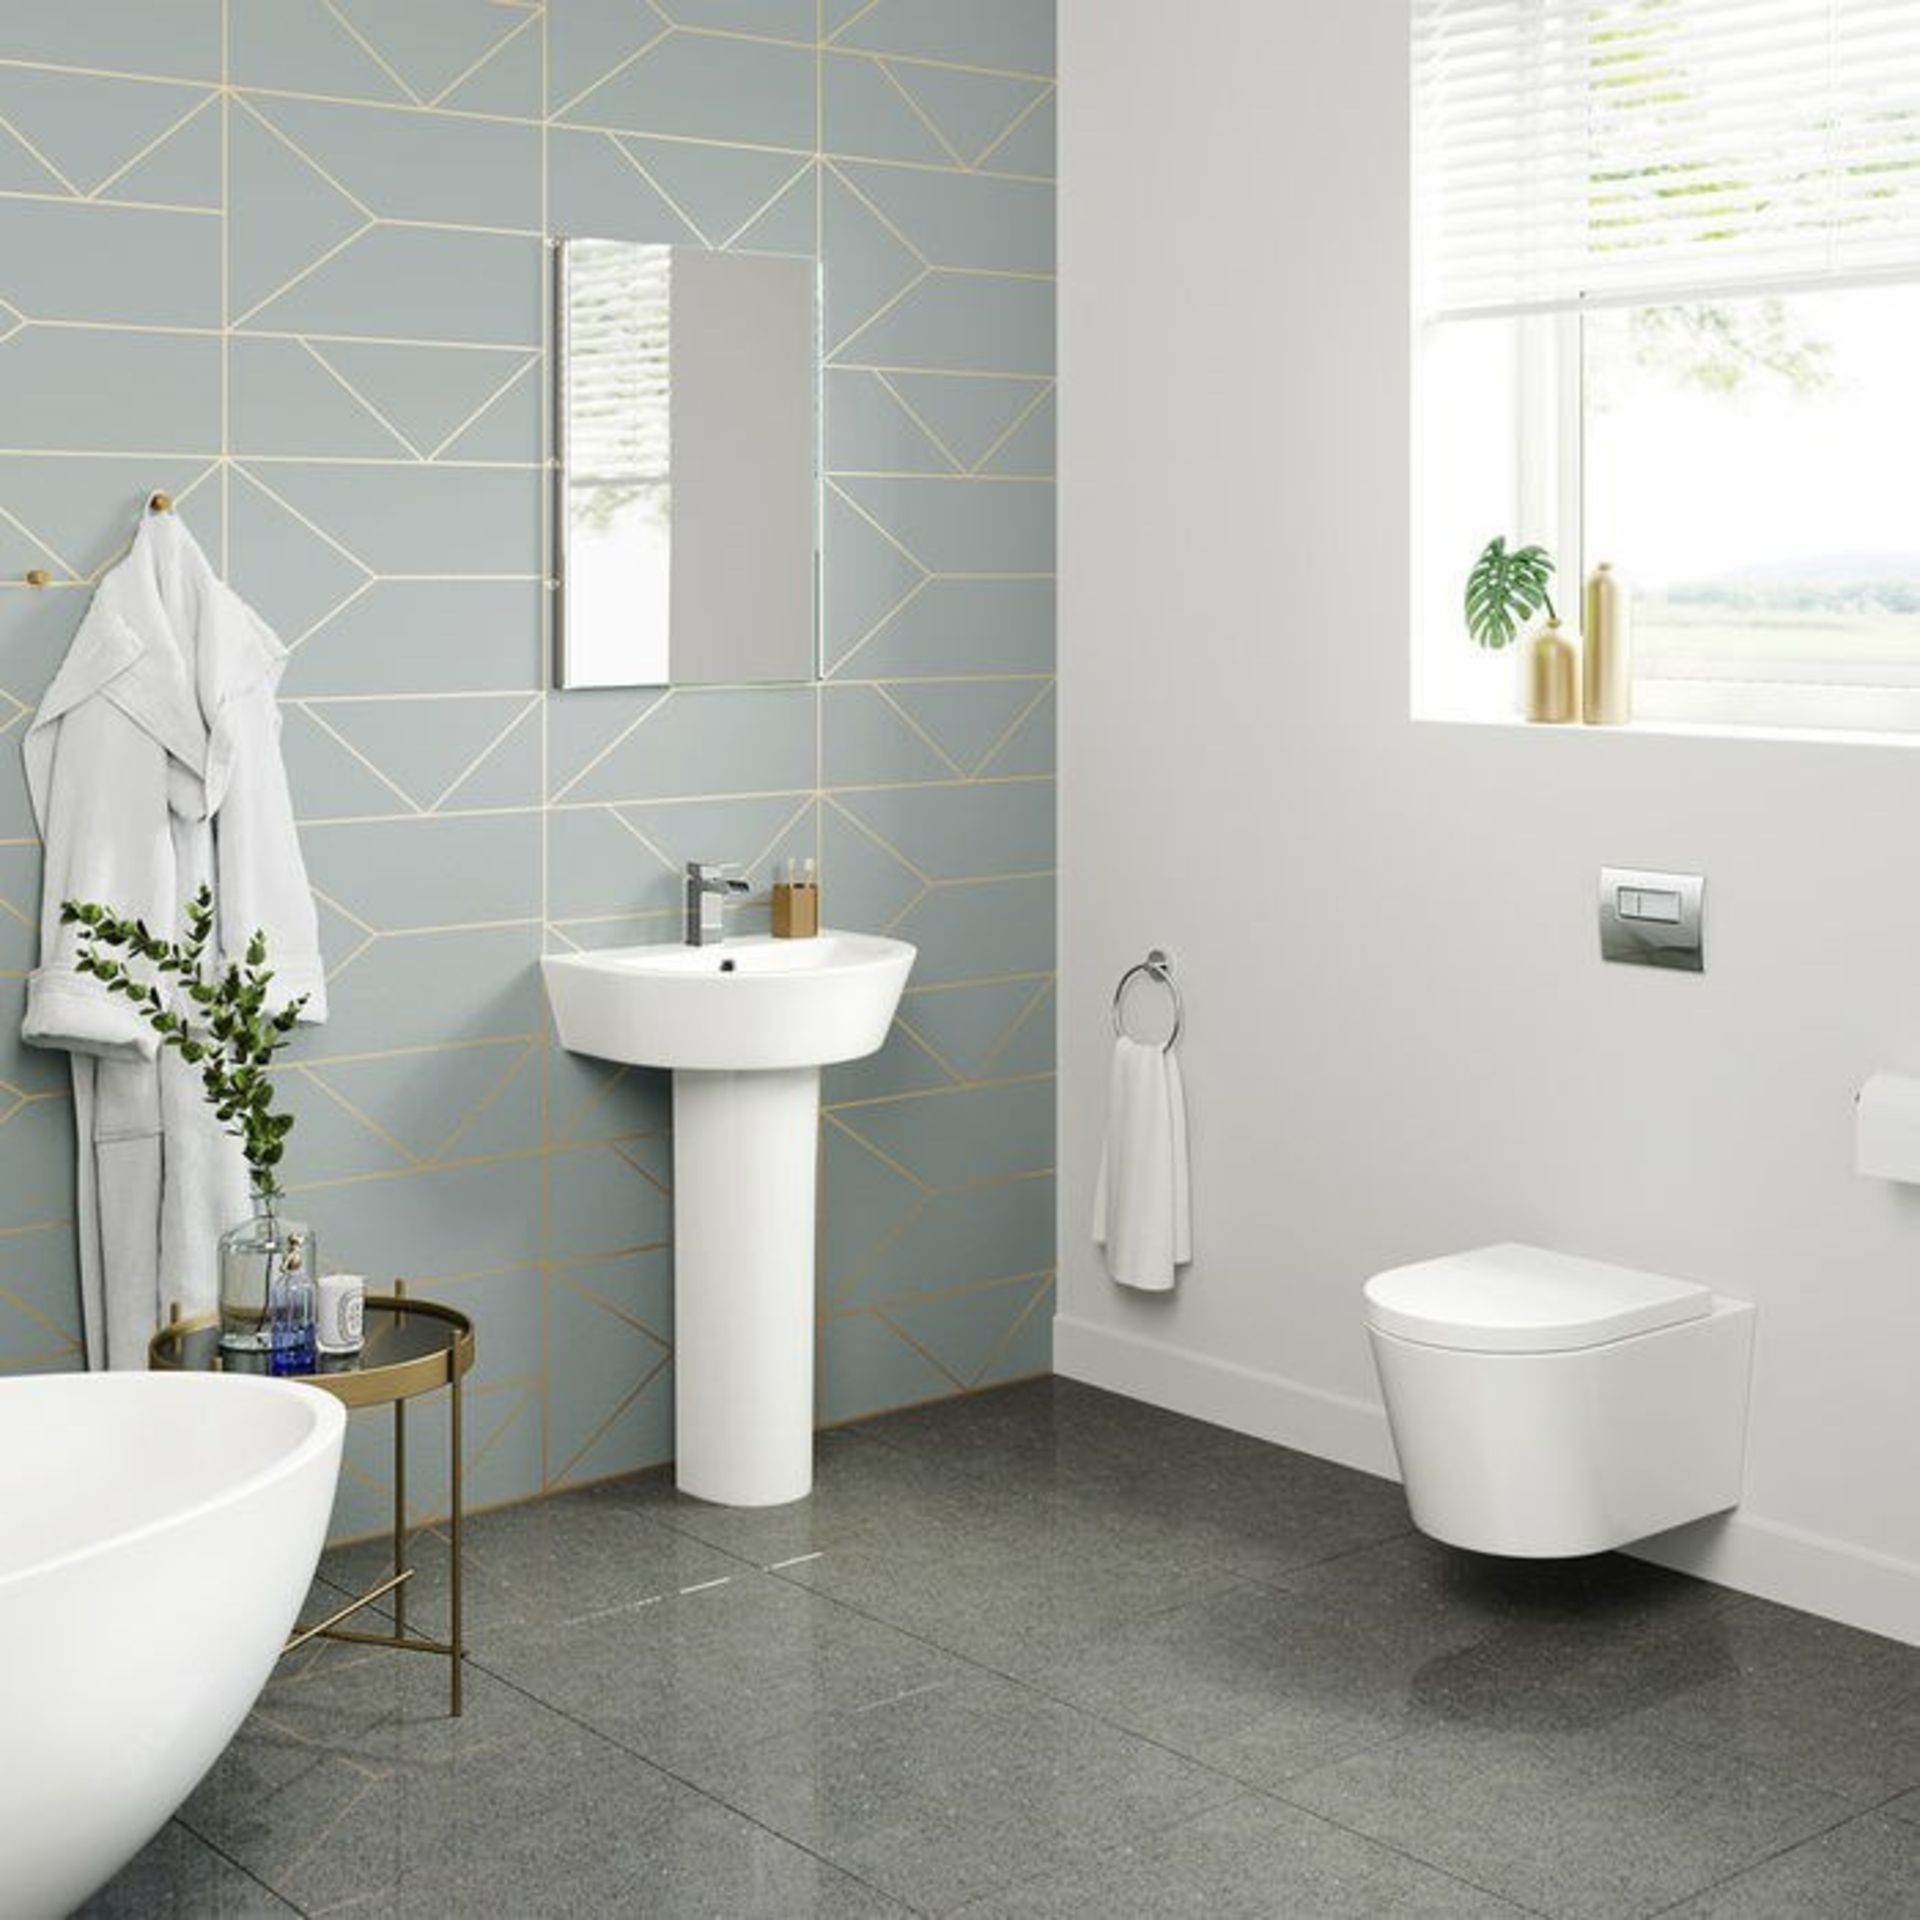 BRAND NEW BOXED Lyon II Wall Hung Toilet inc Luxury Soft Close Seat.RRP £349.99 each.We love this - Image 2 of 2